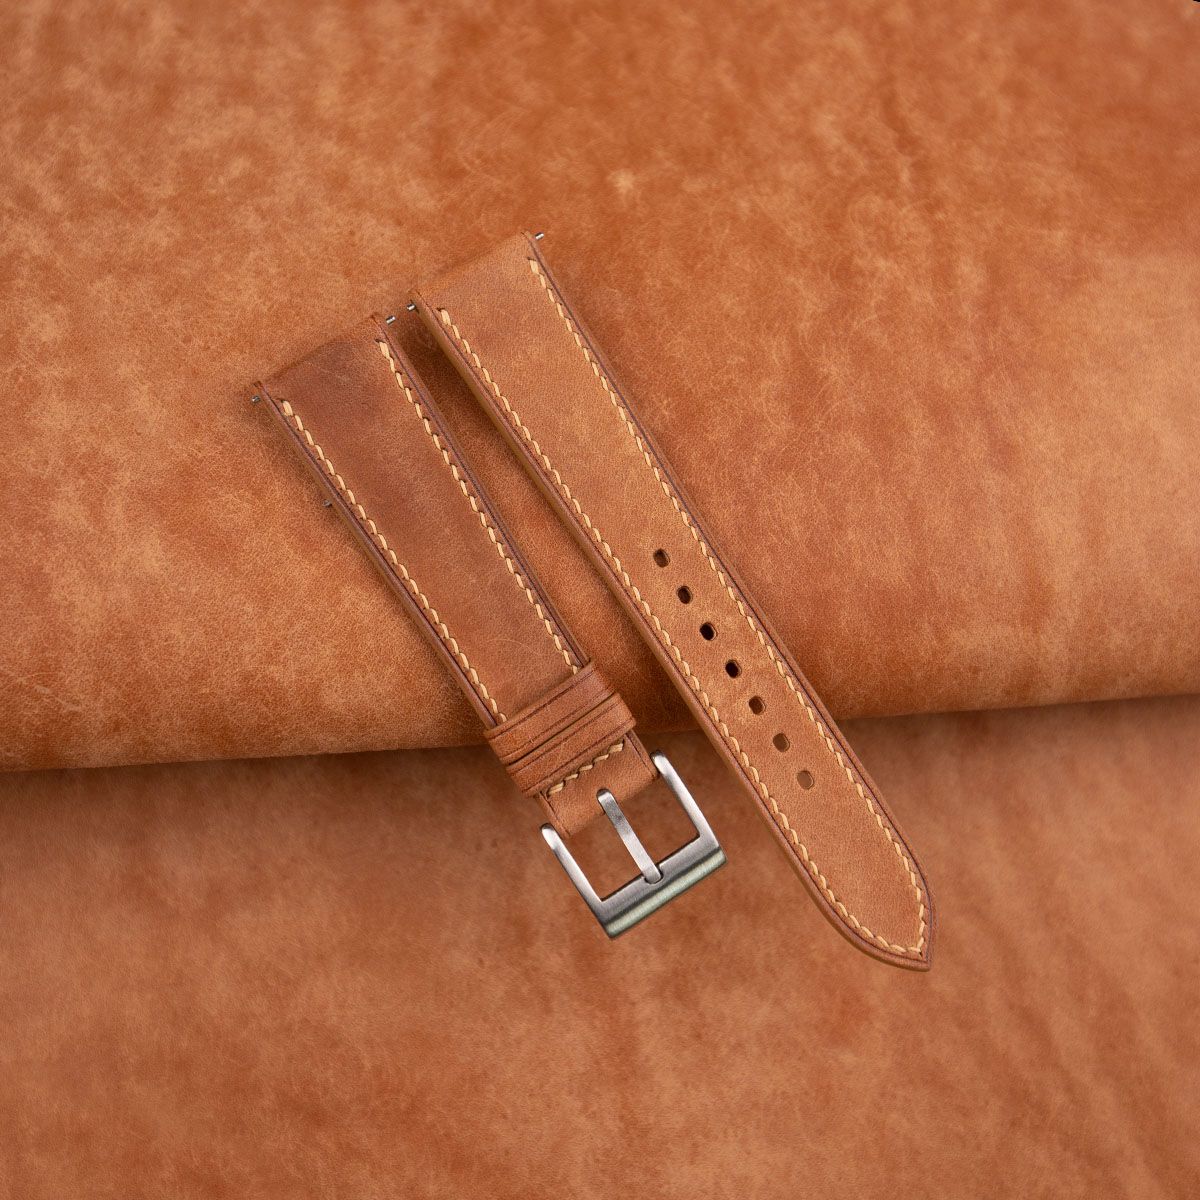 Handcrafted Vachetta Leather Shoulder Strap Replacement - Natural Vachetta  Leather or Honey Vintage Tanning Handmade Patina - 27 Strap